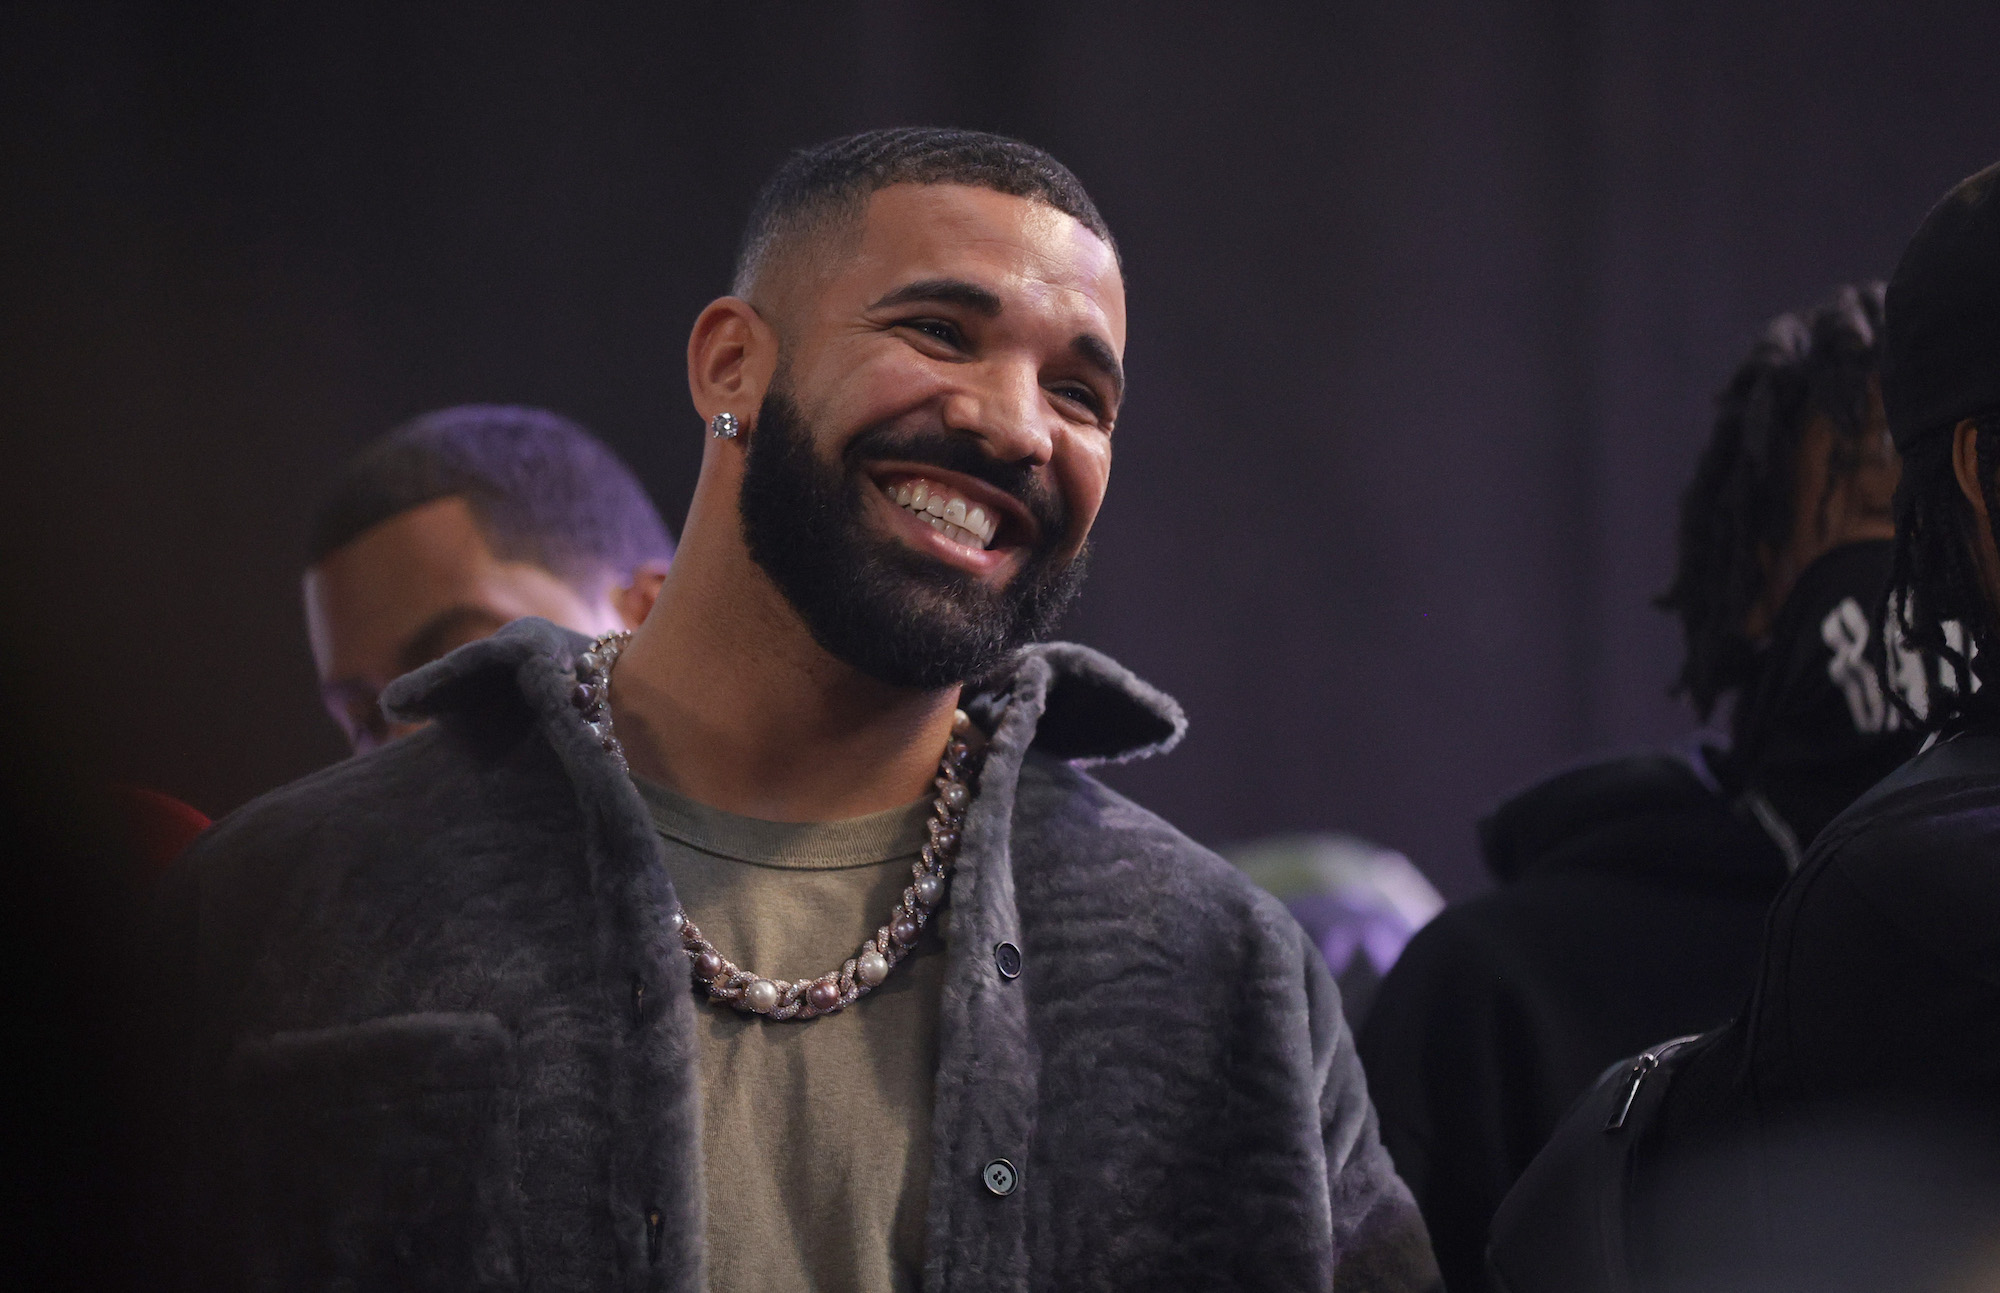 Drake, who has a show at the Apollo Theater, smiling for a photo